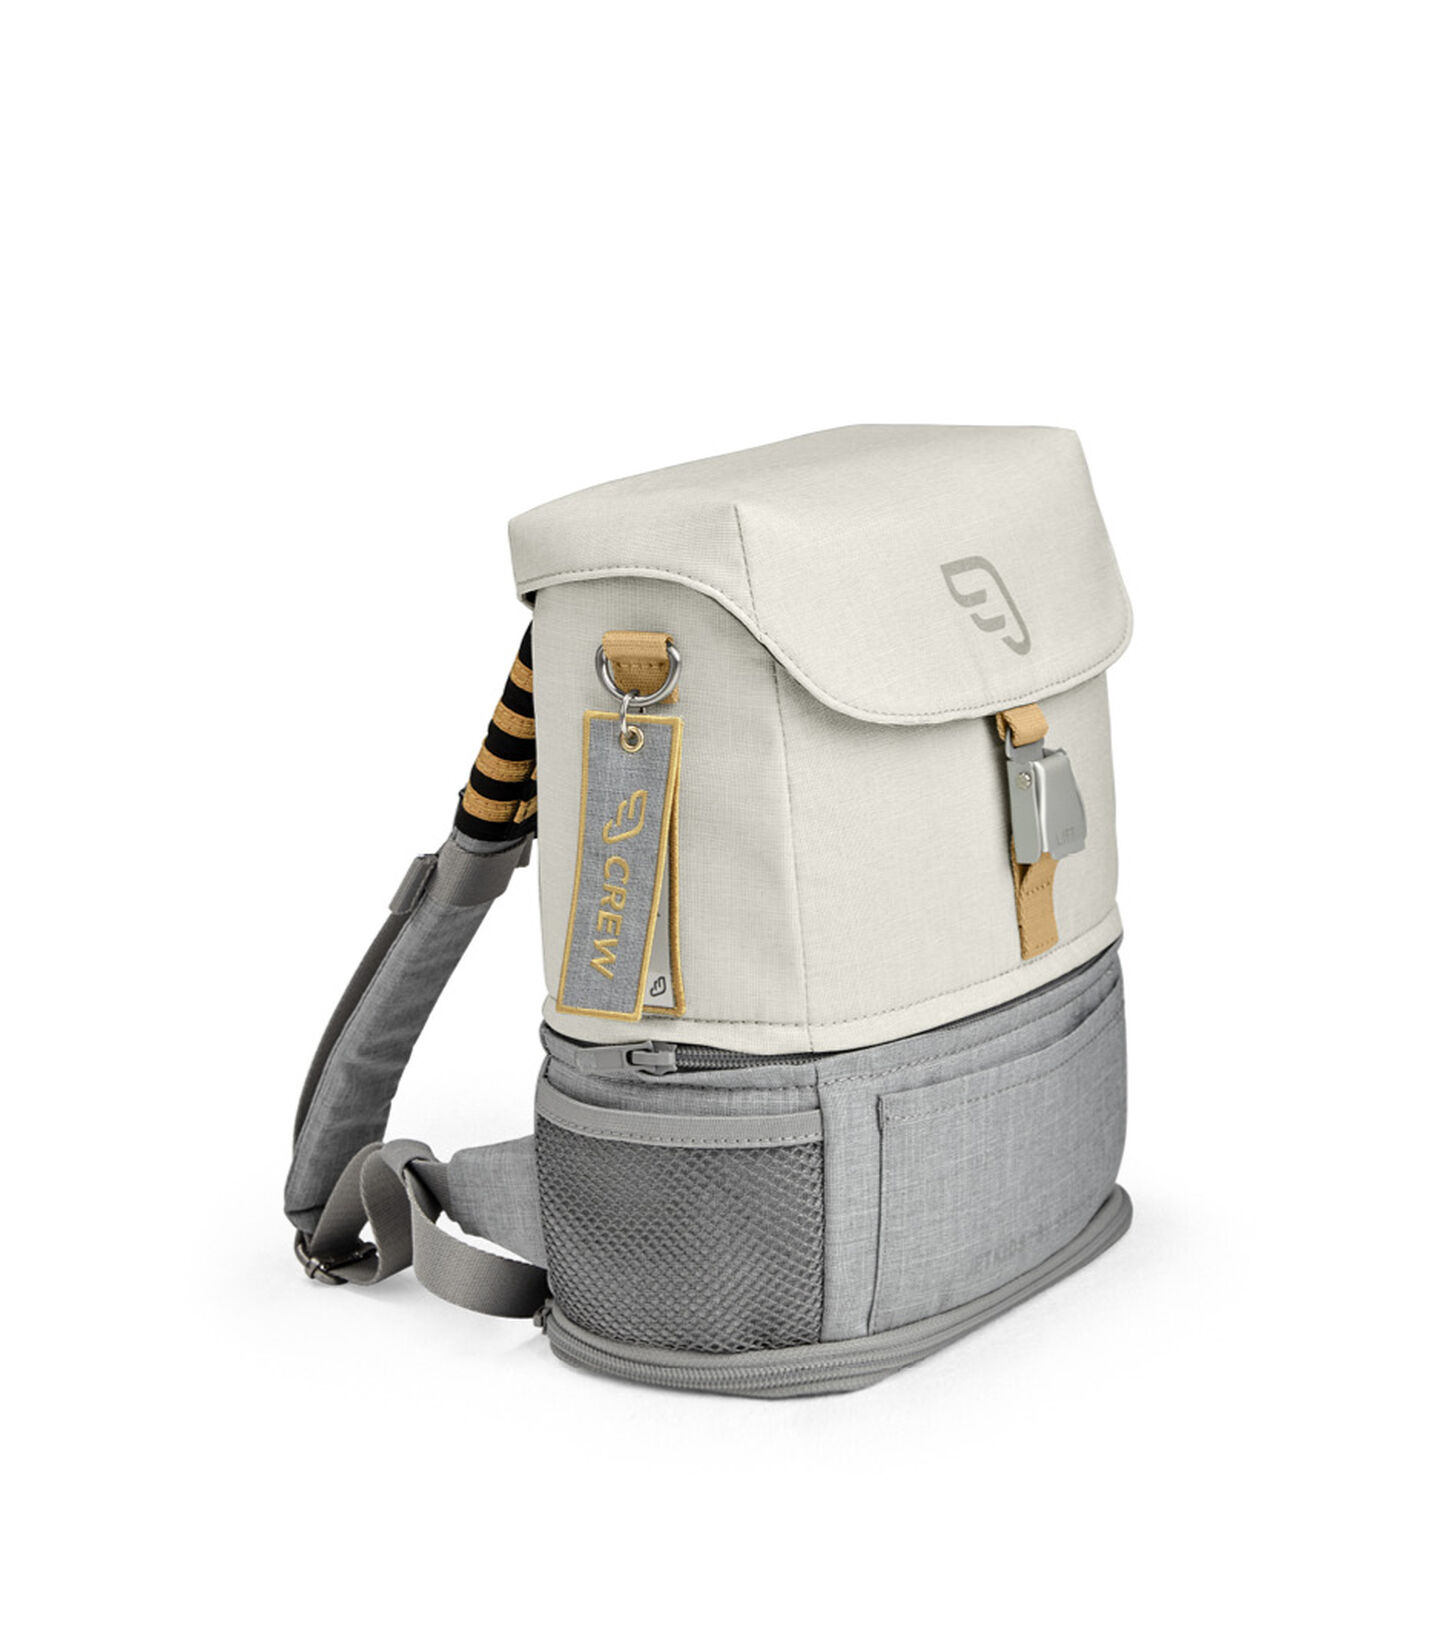 JetKids by Stokke® Crew Backpack White, Biały, mainview view 1